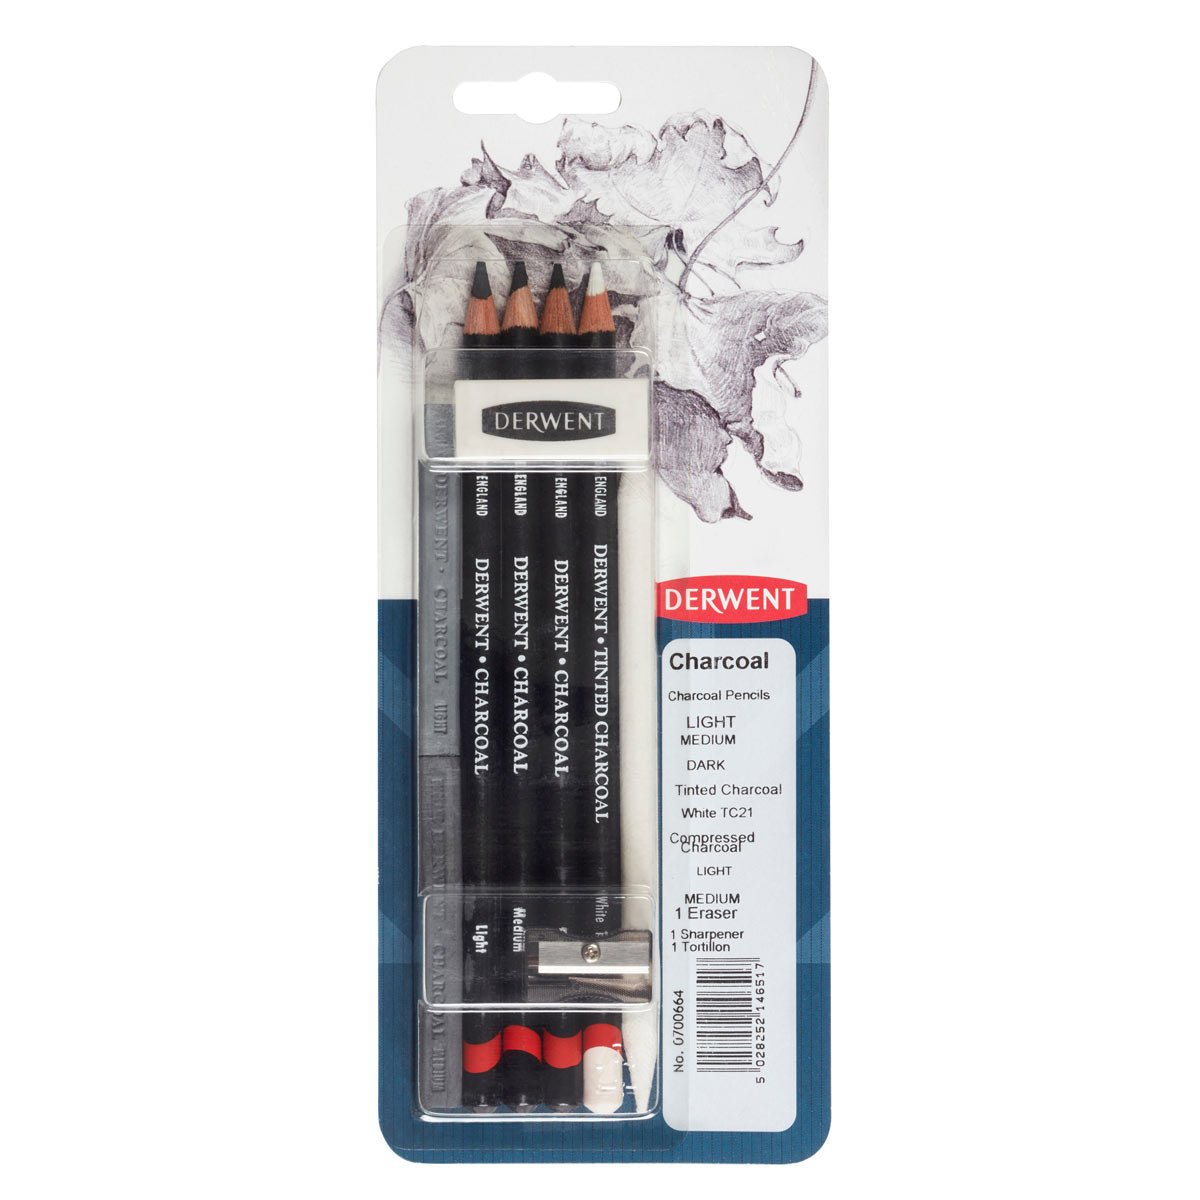 Derwent - Mixed Media Blister 8 Piece - Charcoal Pencil